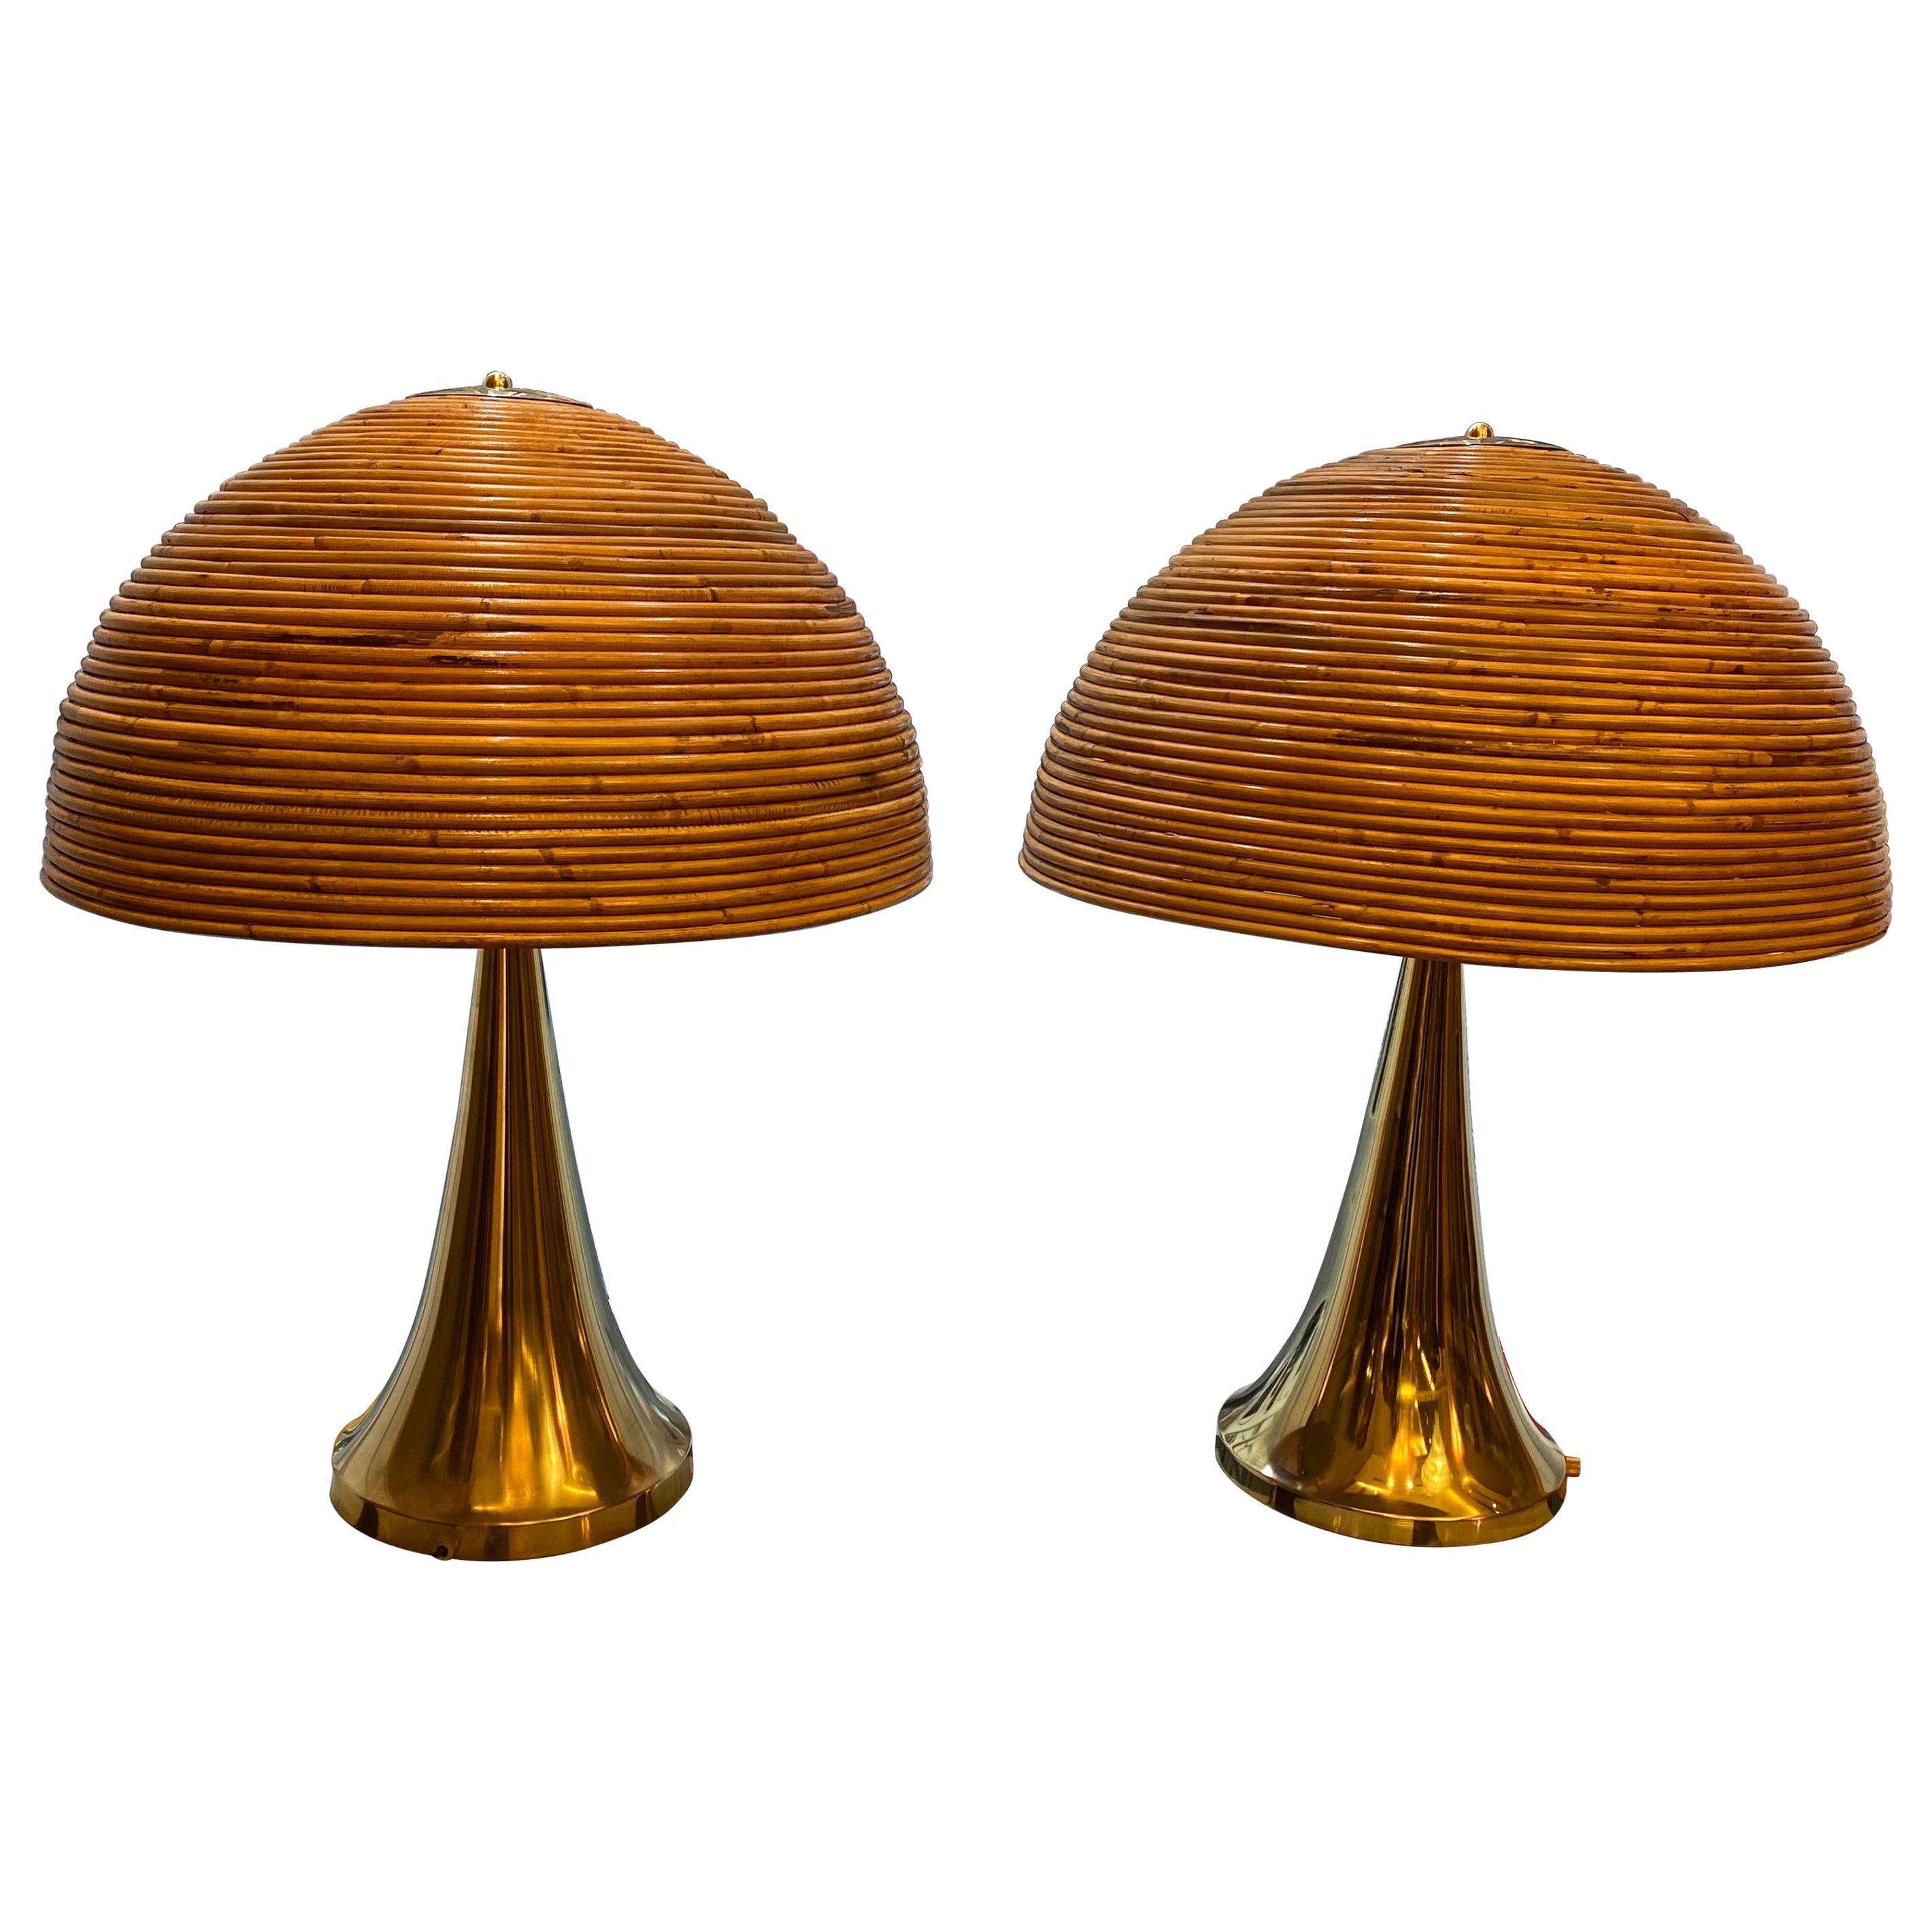 Pair of Large Modern Table Lamps in the Manner of Gabriella Crespi